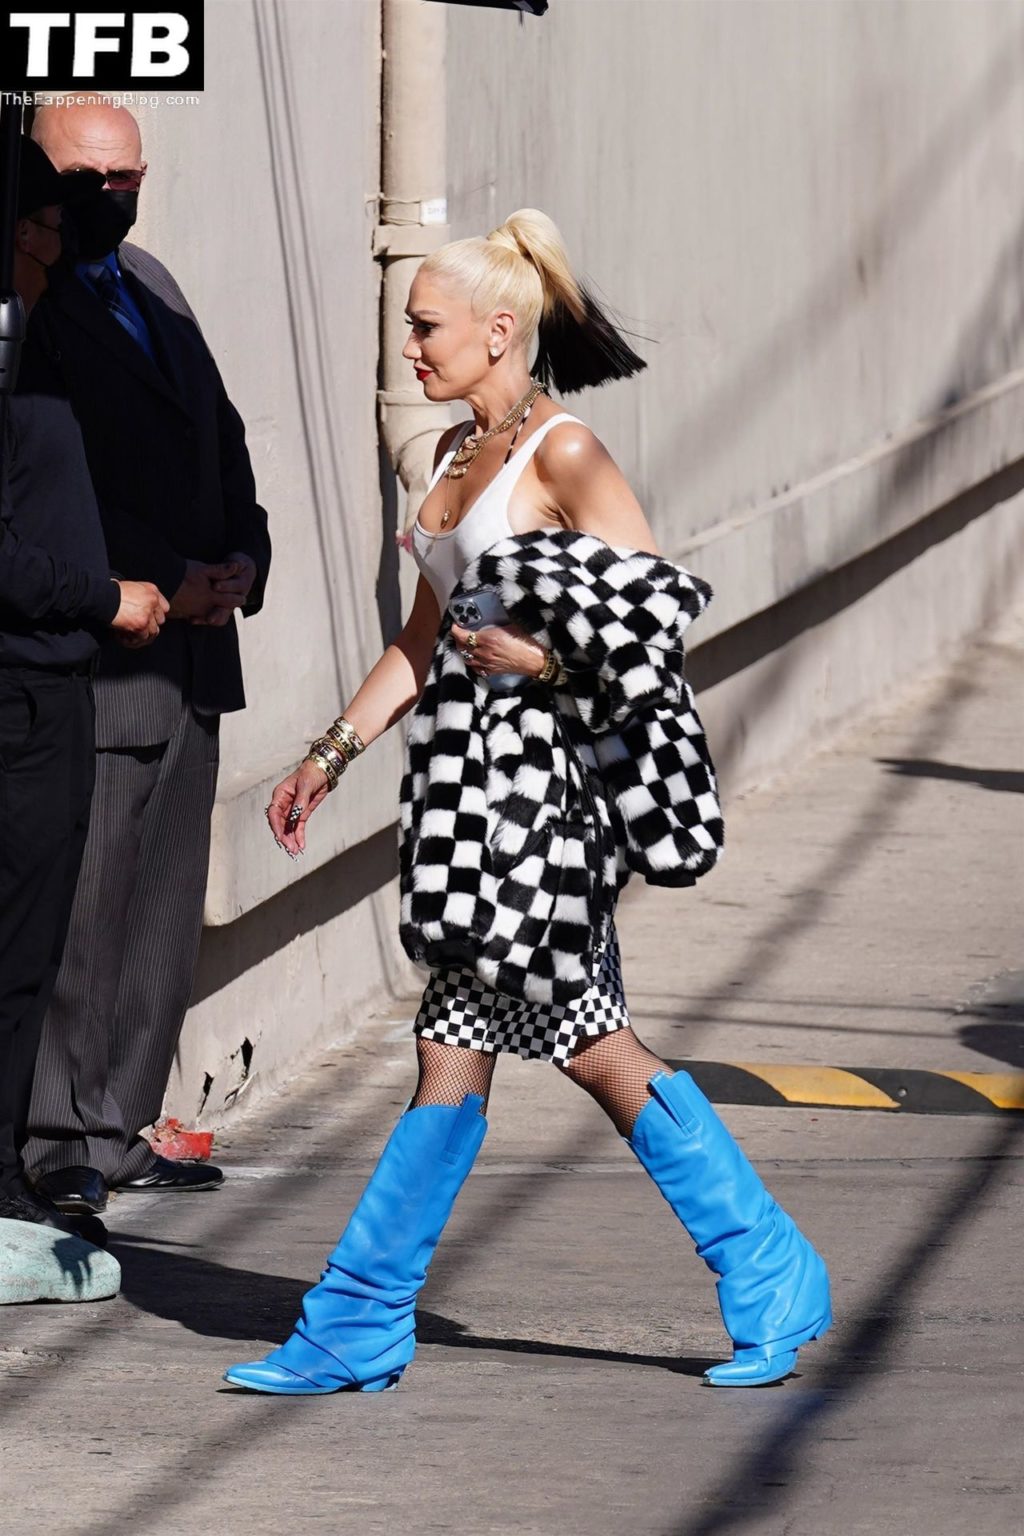 Gwen Stefani Sexy The Fappening Blog 83 1024x1536 - Gwen Stefani Arrives For an Appearance on Jimmy Kimmel Live! (87 Photos)